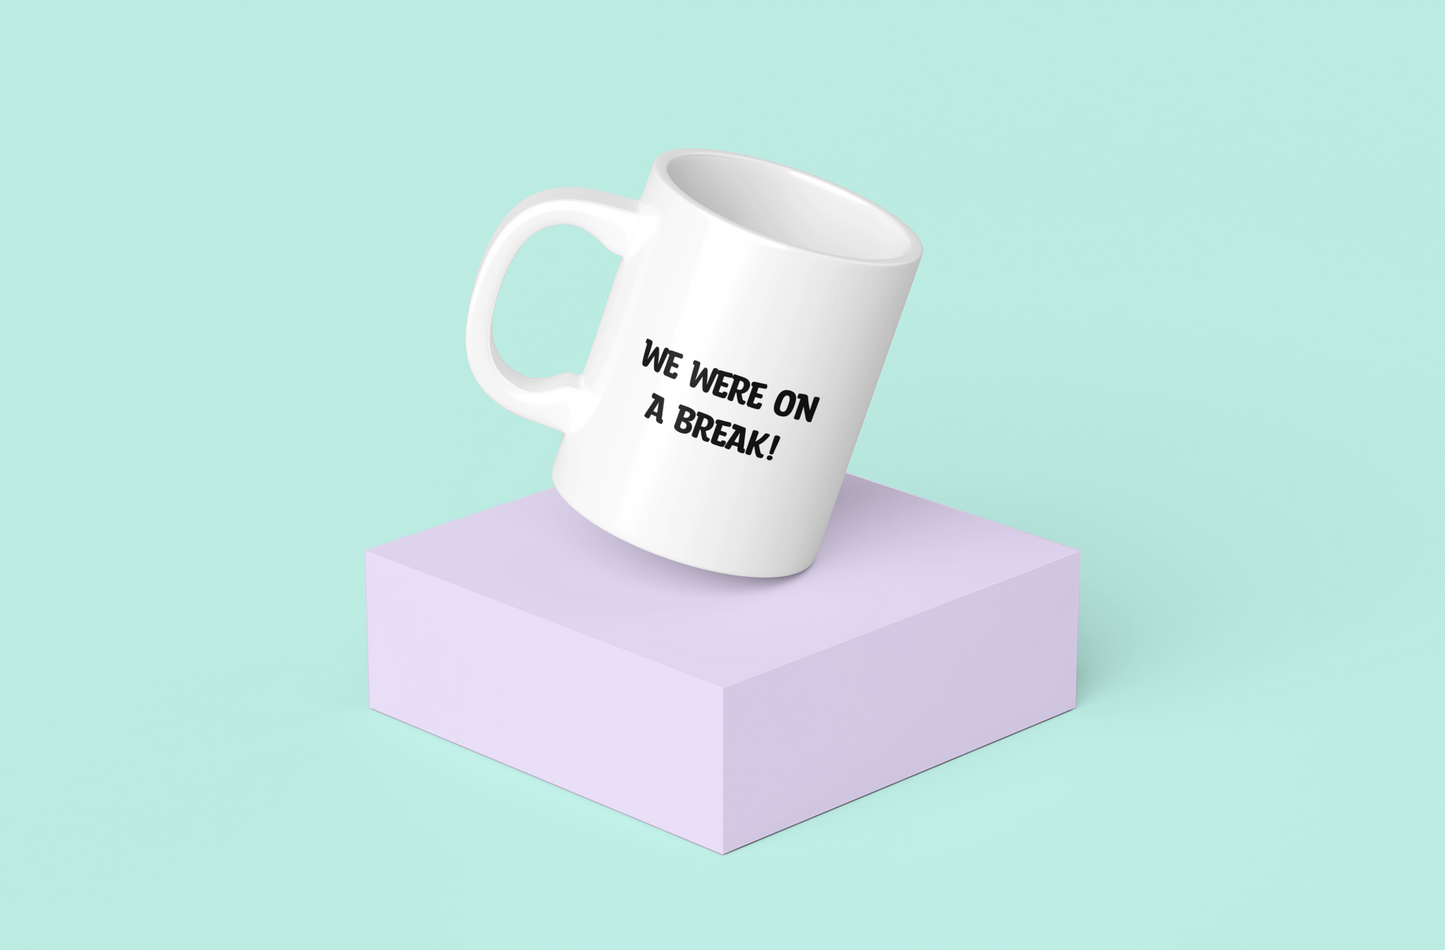 A glossy white 11oz mug with the words 'WE WERE ON A BREAK!' printed in it's centre in large block capital black font. The mug is placed on an angle on a pale purple block with a light green background.